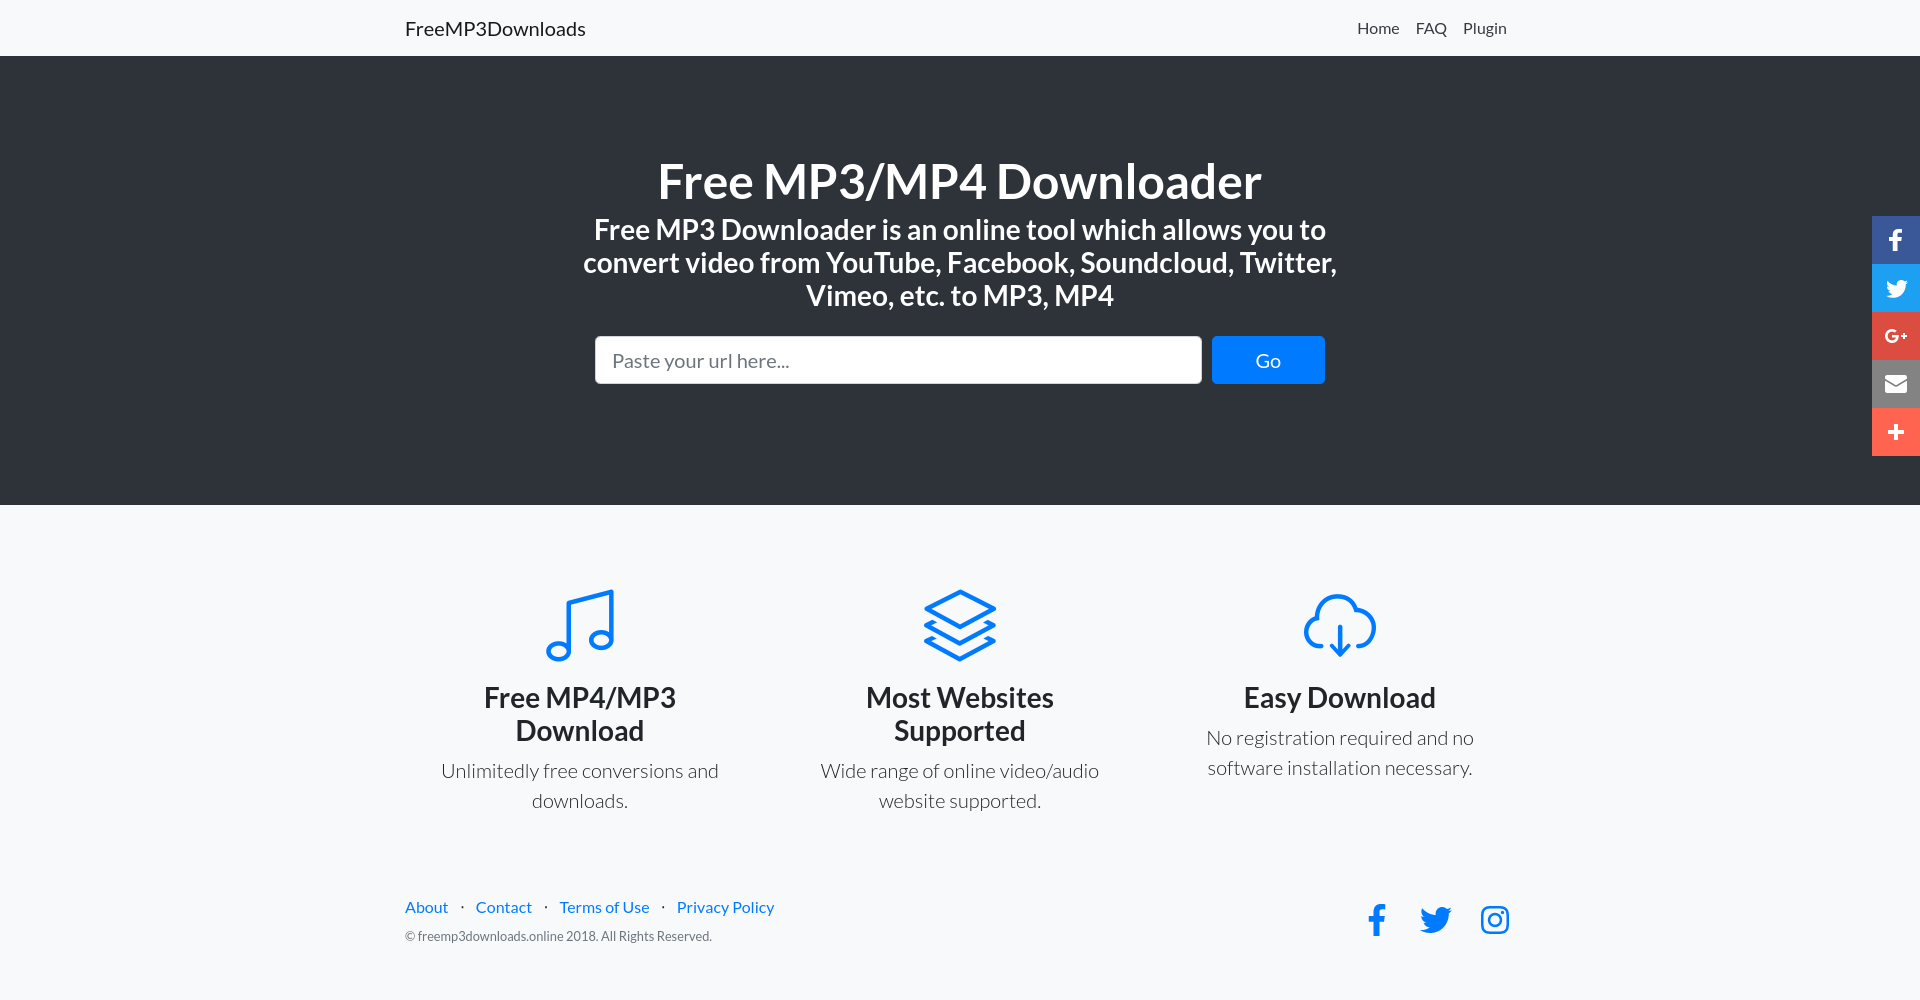 mp3 music download programs pay